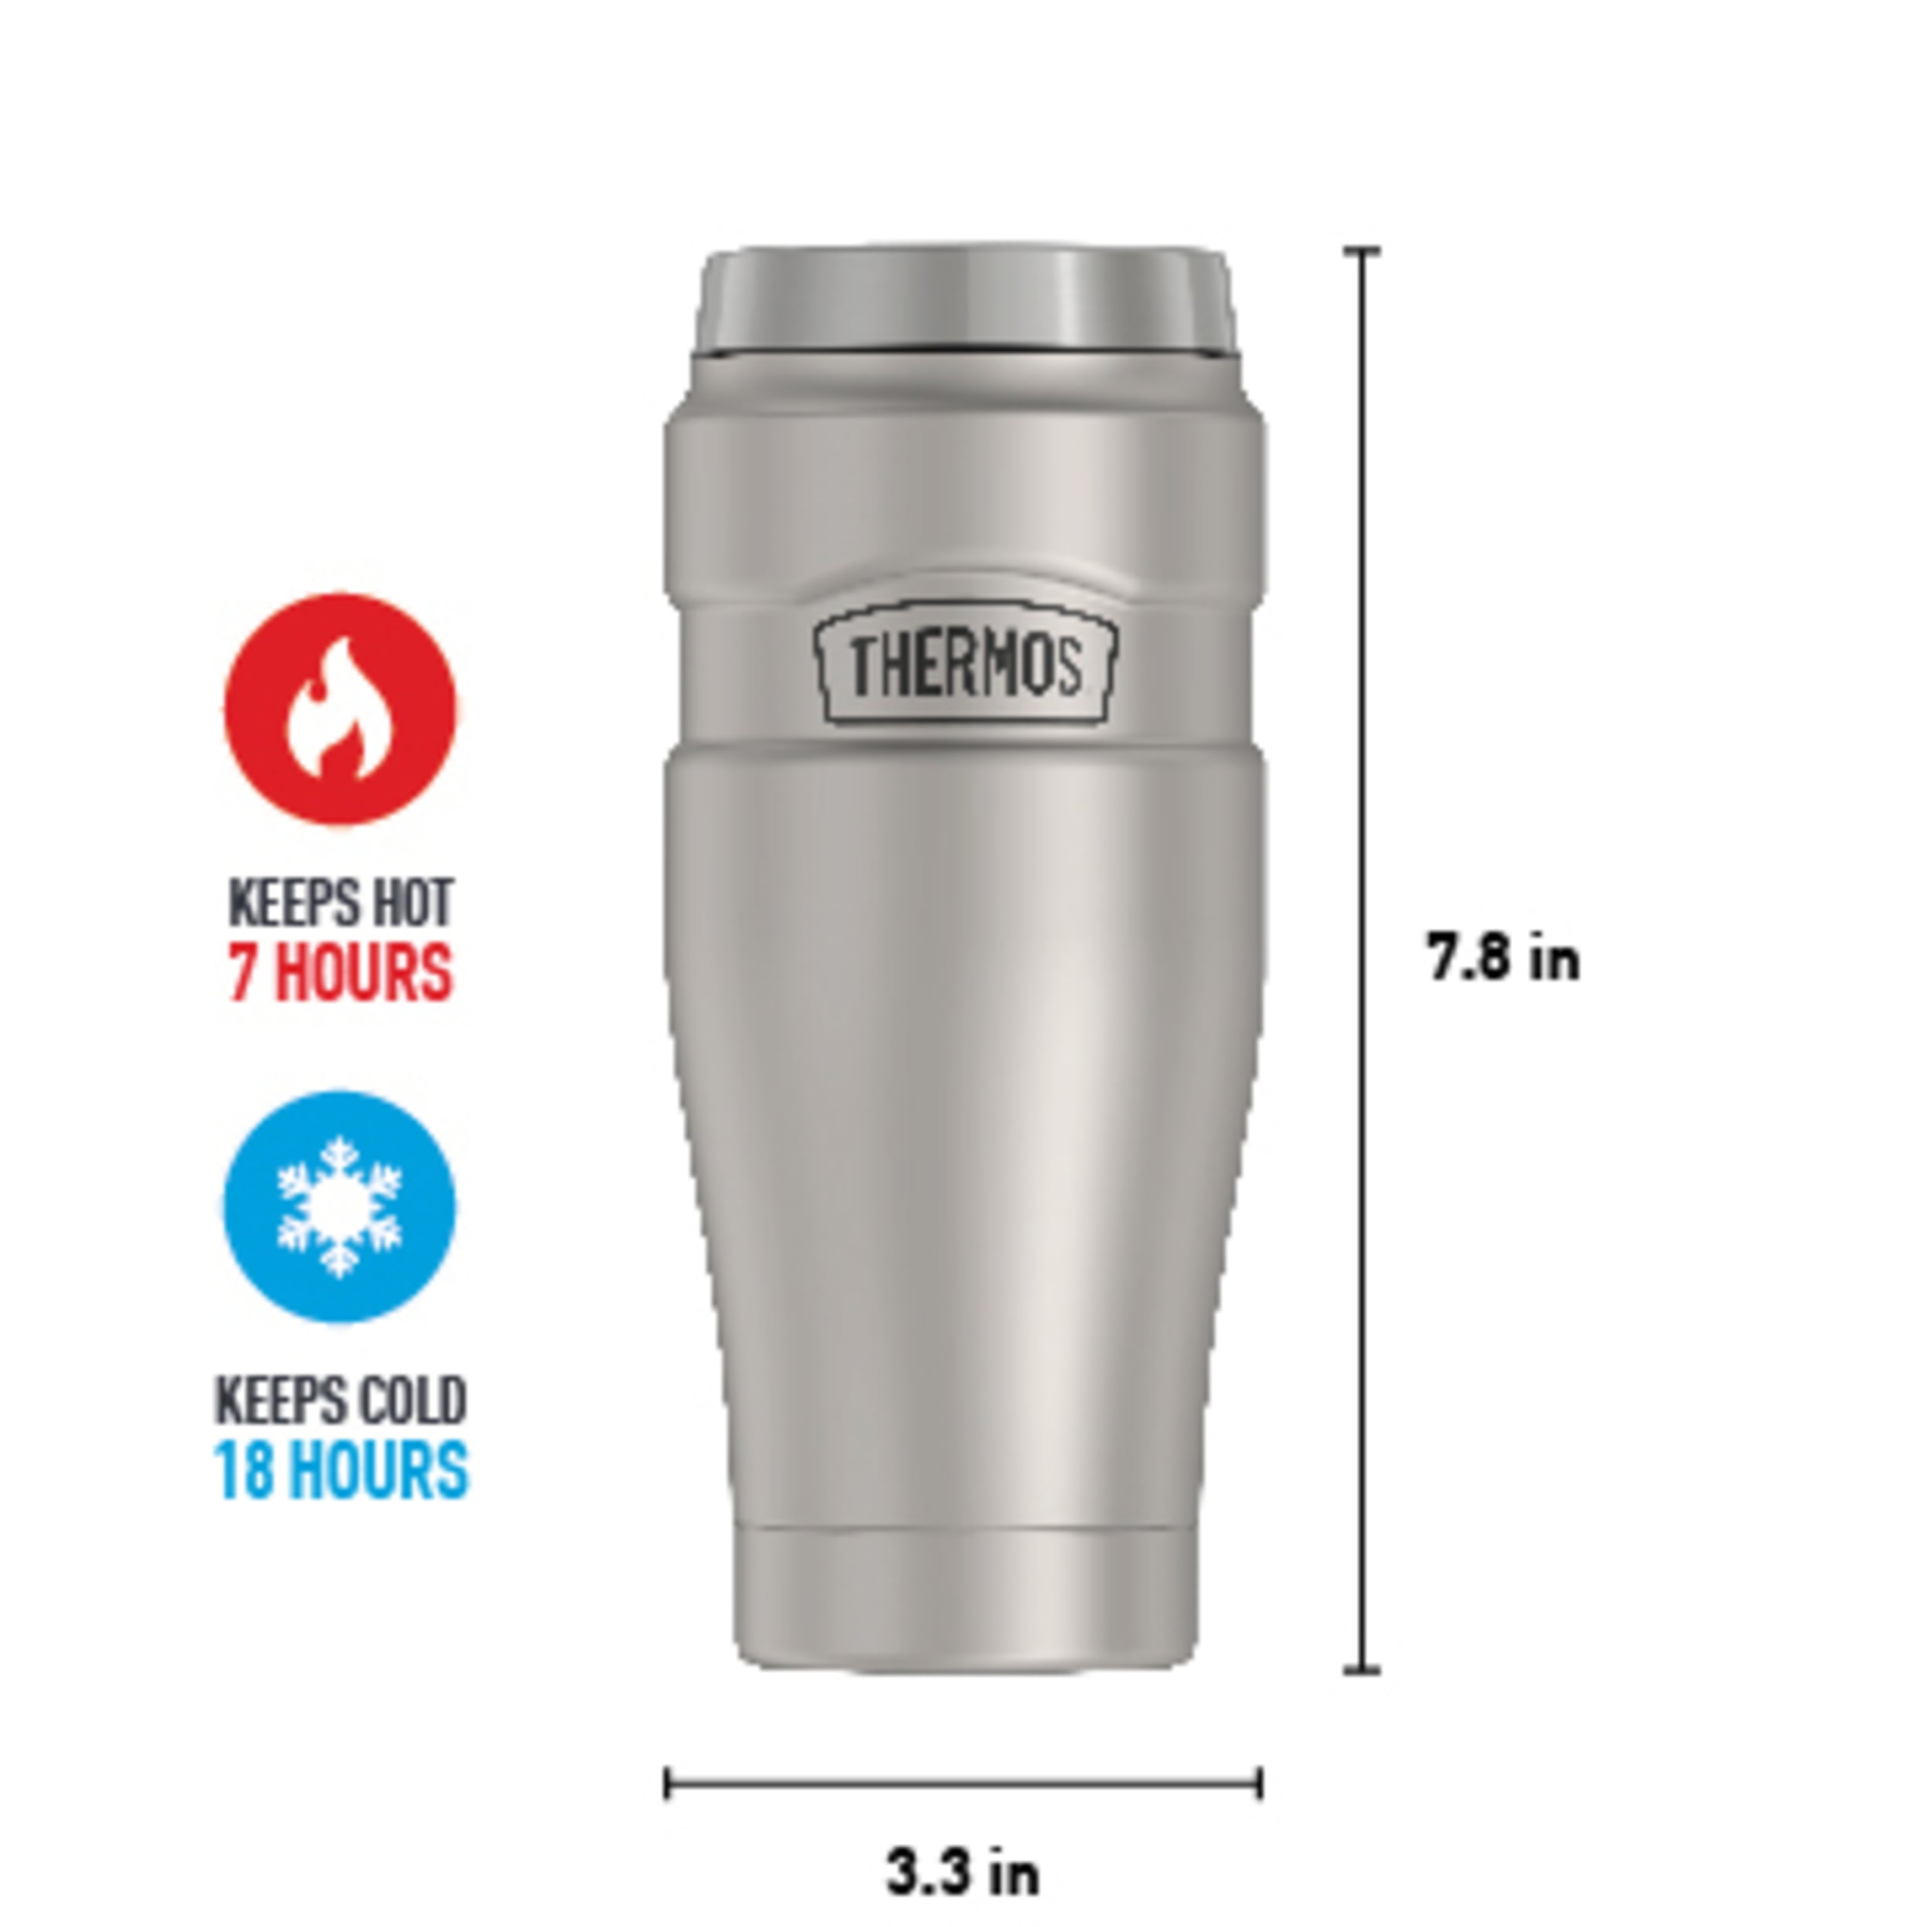 Thermos Stainless King 16 Oz. Travel Tumbler in Stainless Steel